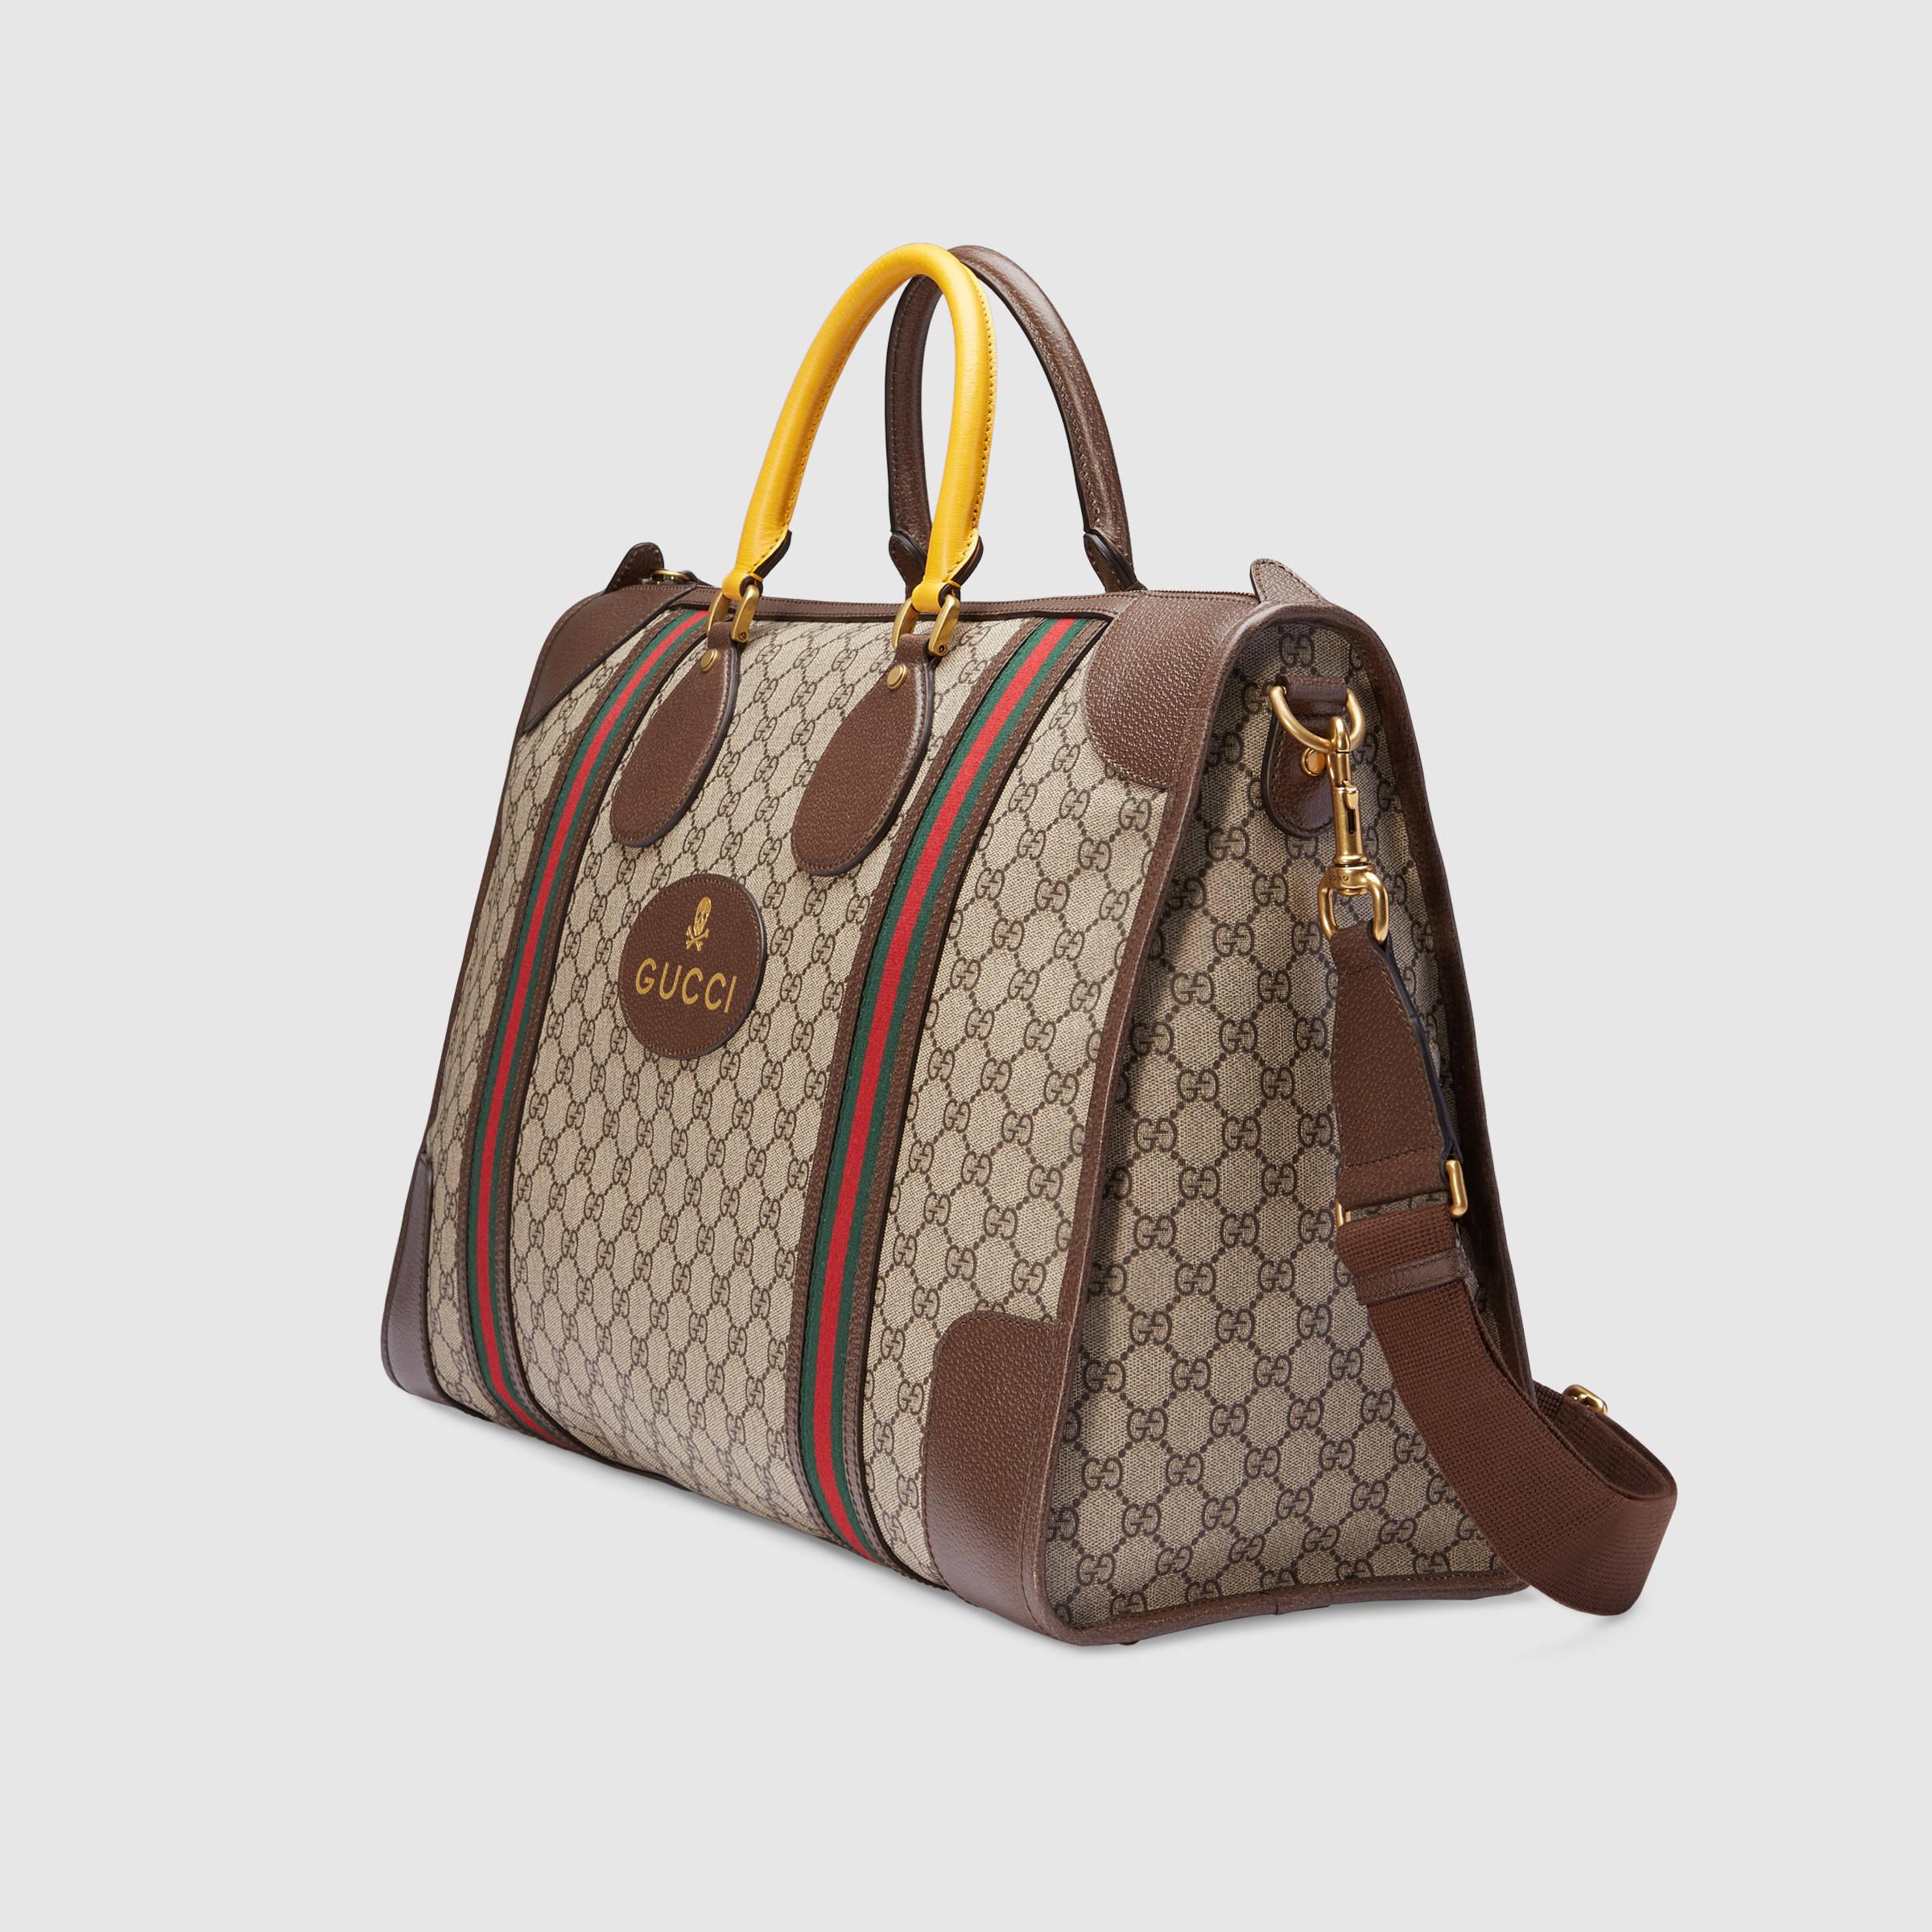 Gucci Soft Gg Supreme Duffle Bag With Web in Brown | Lyst